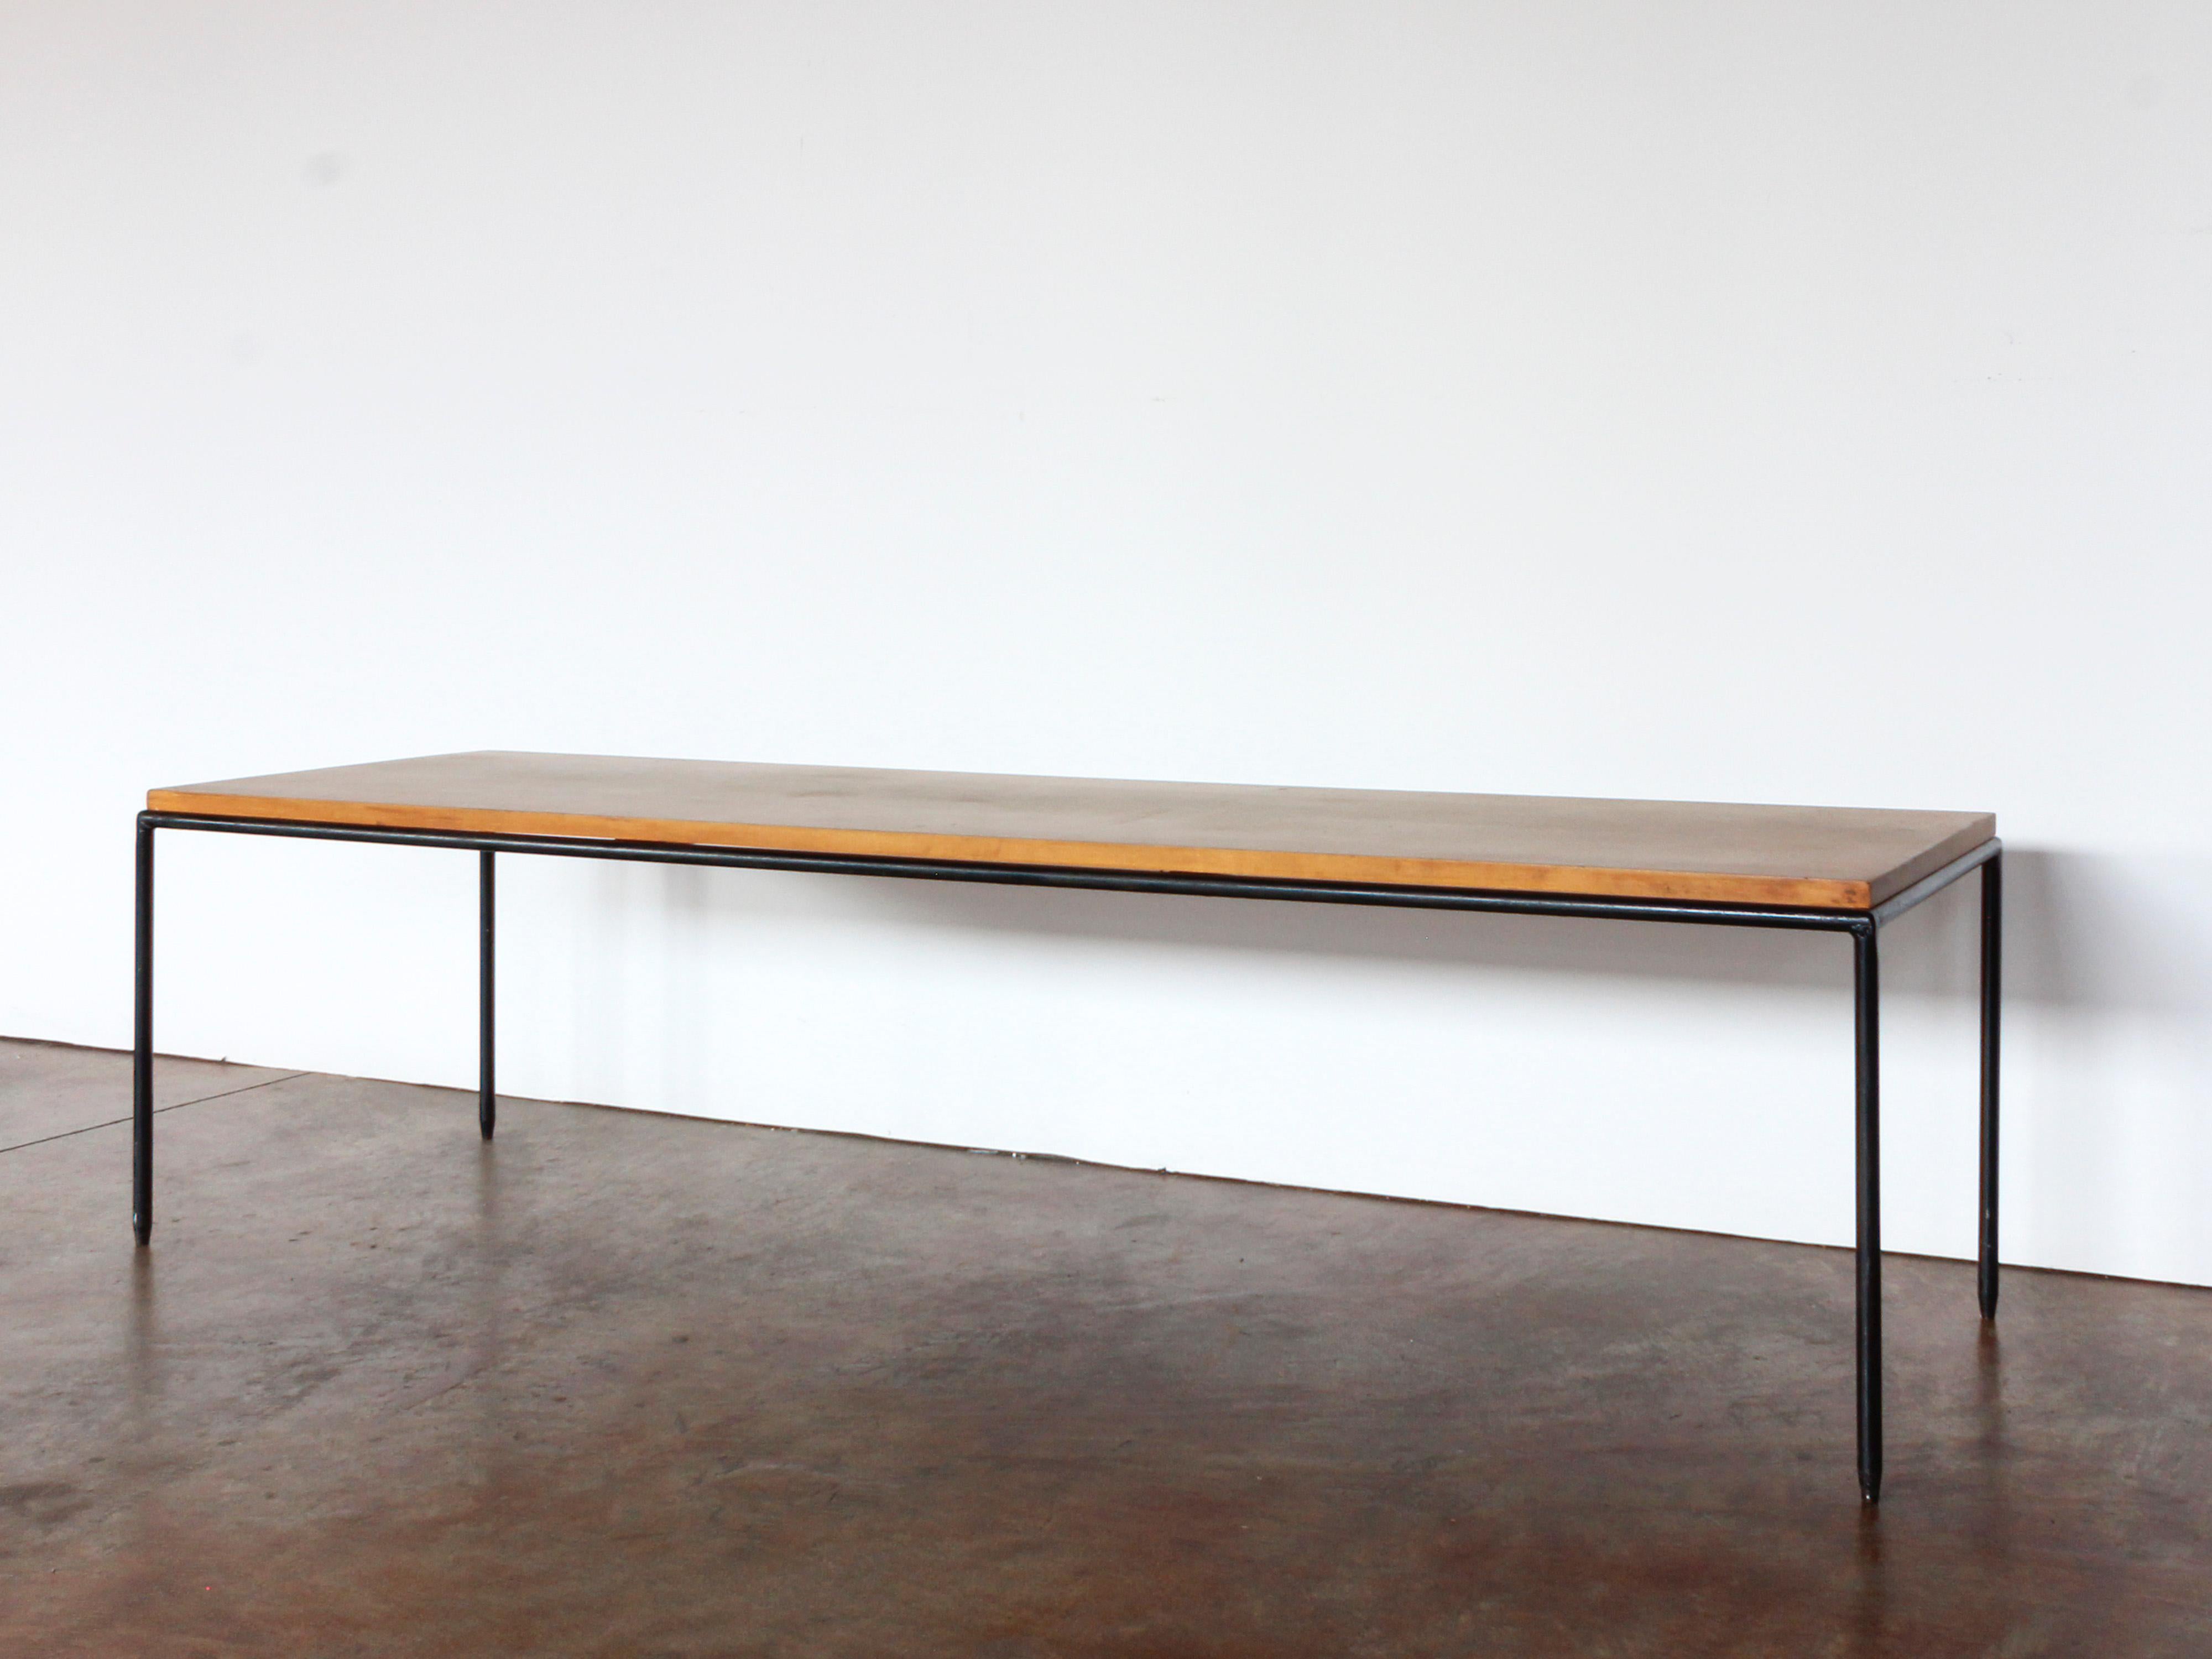 Midcentury French bench, hammered iron frame supports an oak top, c. 1950.